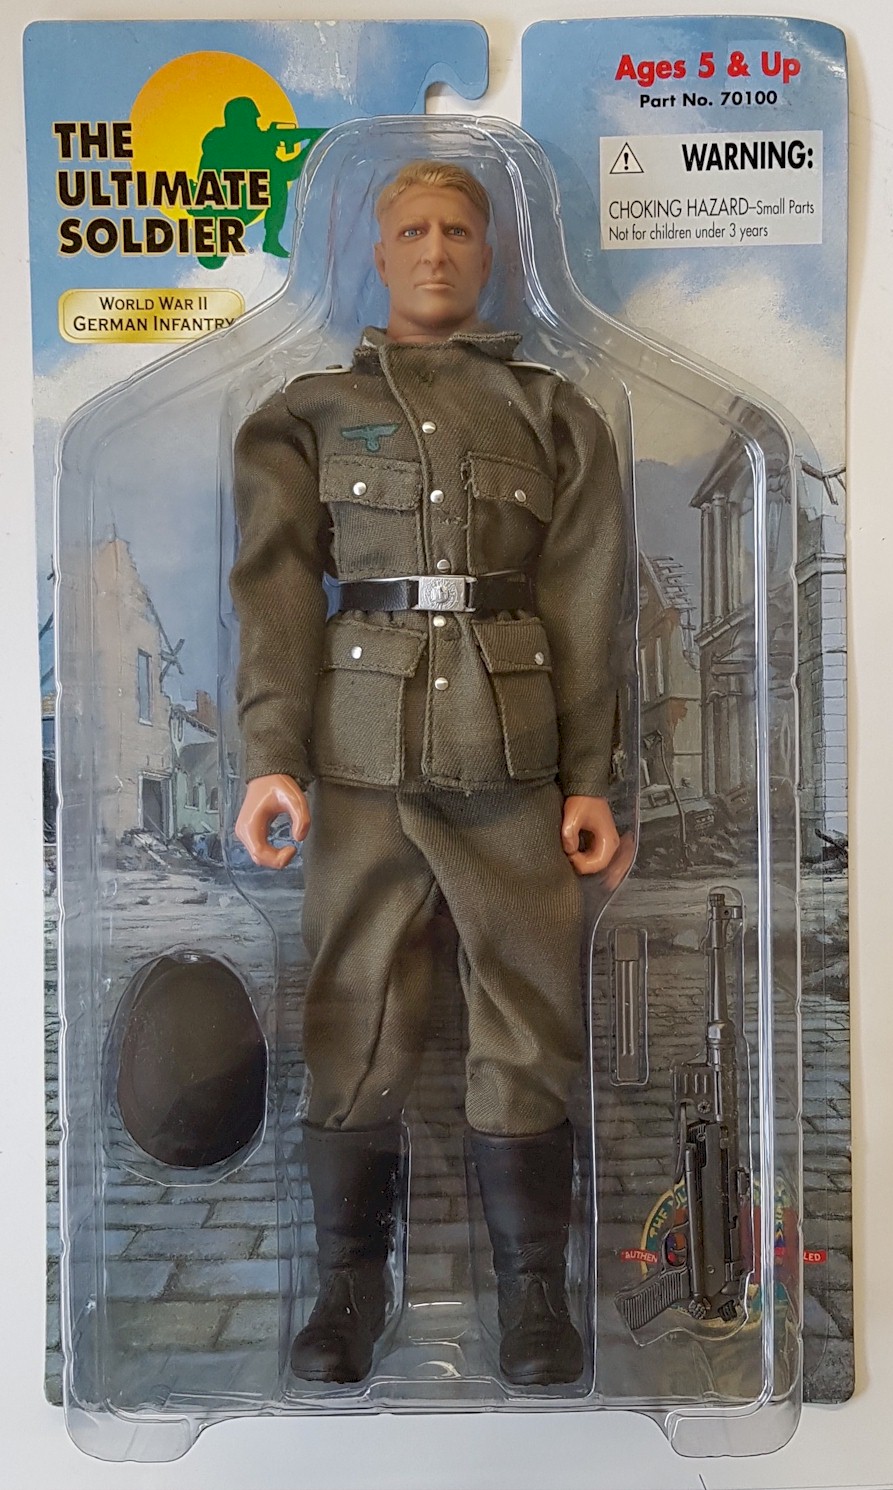 THE ULTIMATE SOLDIER WWII GERMAN INFANTRY 1999 